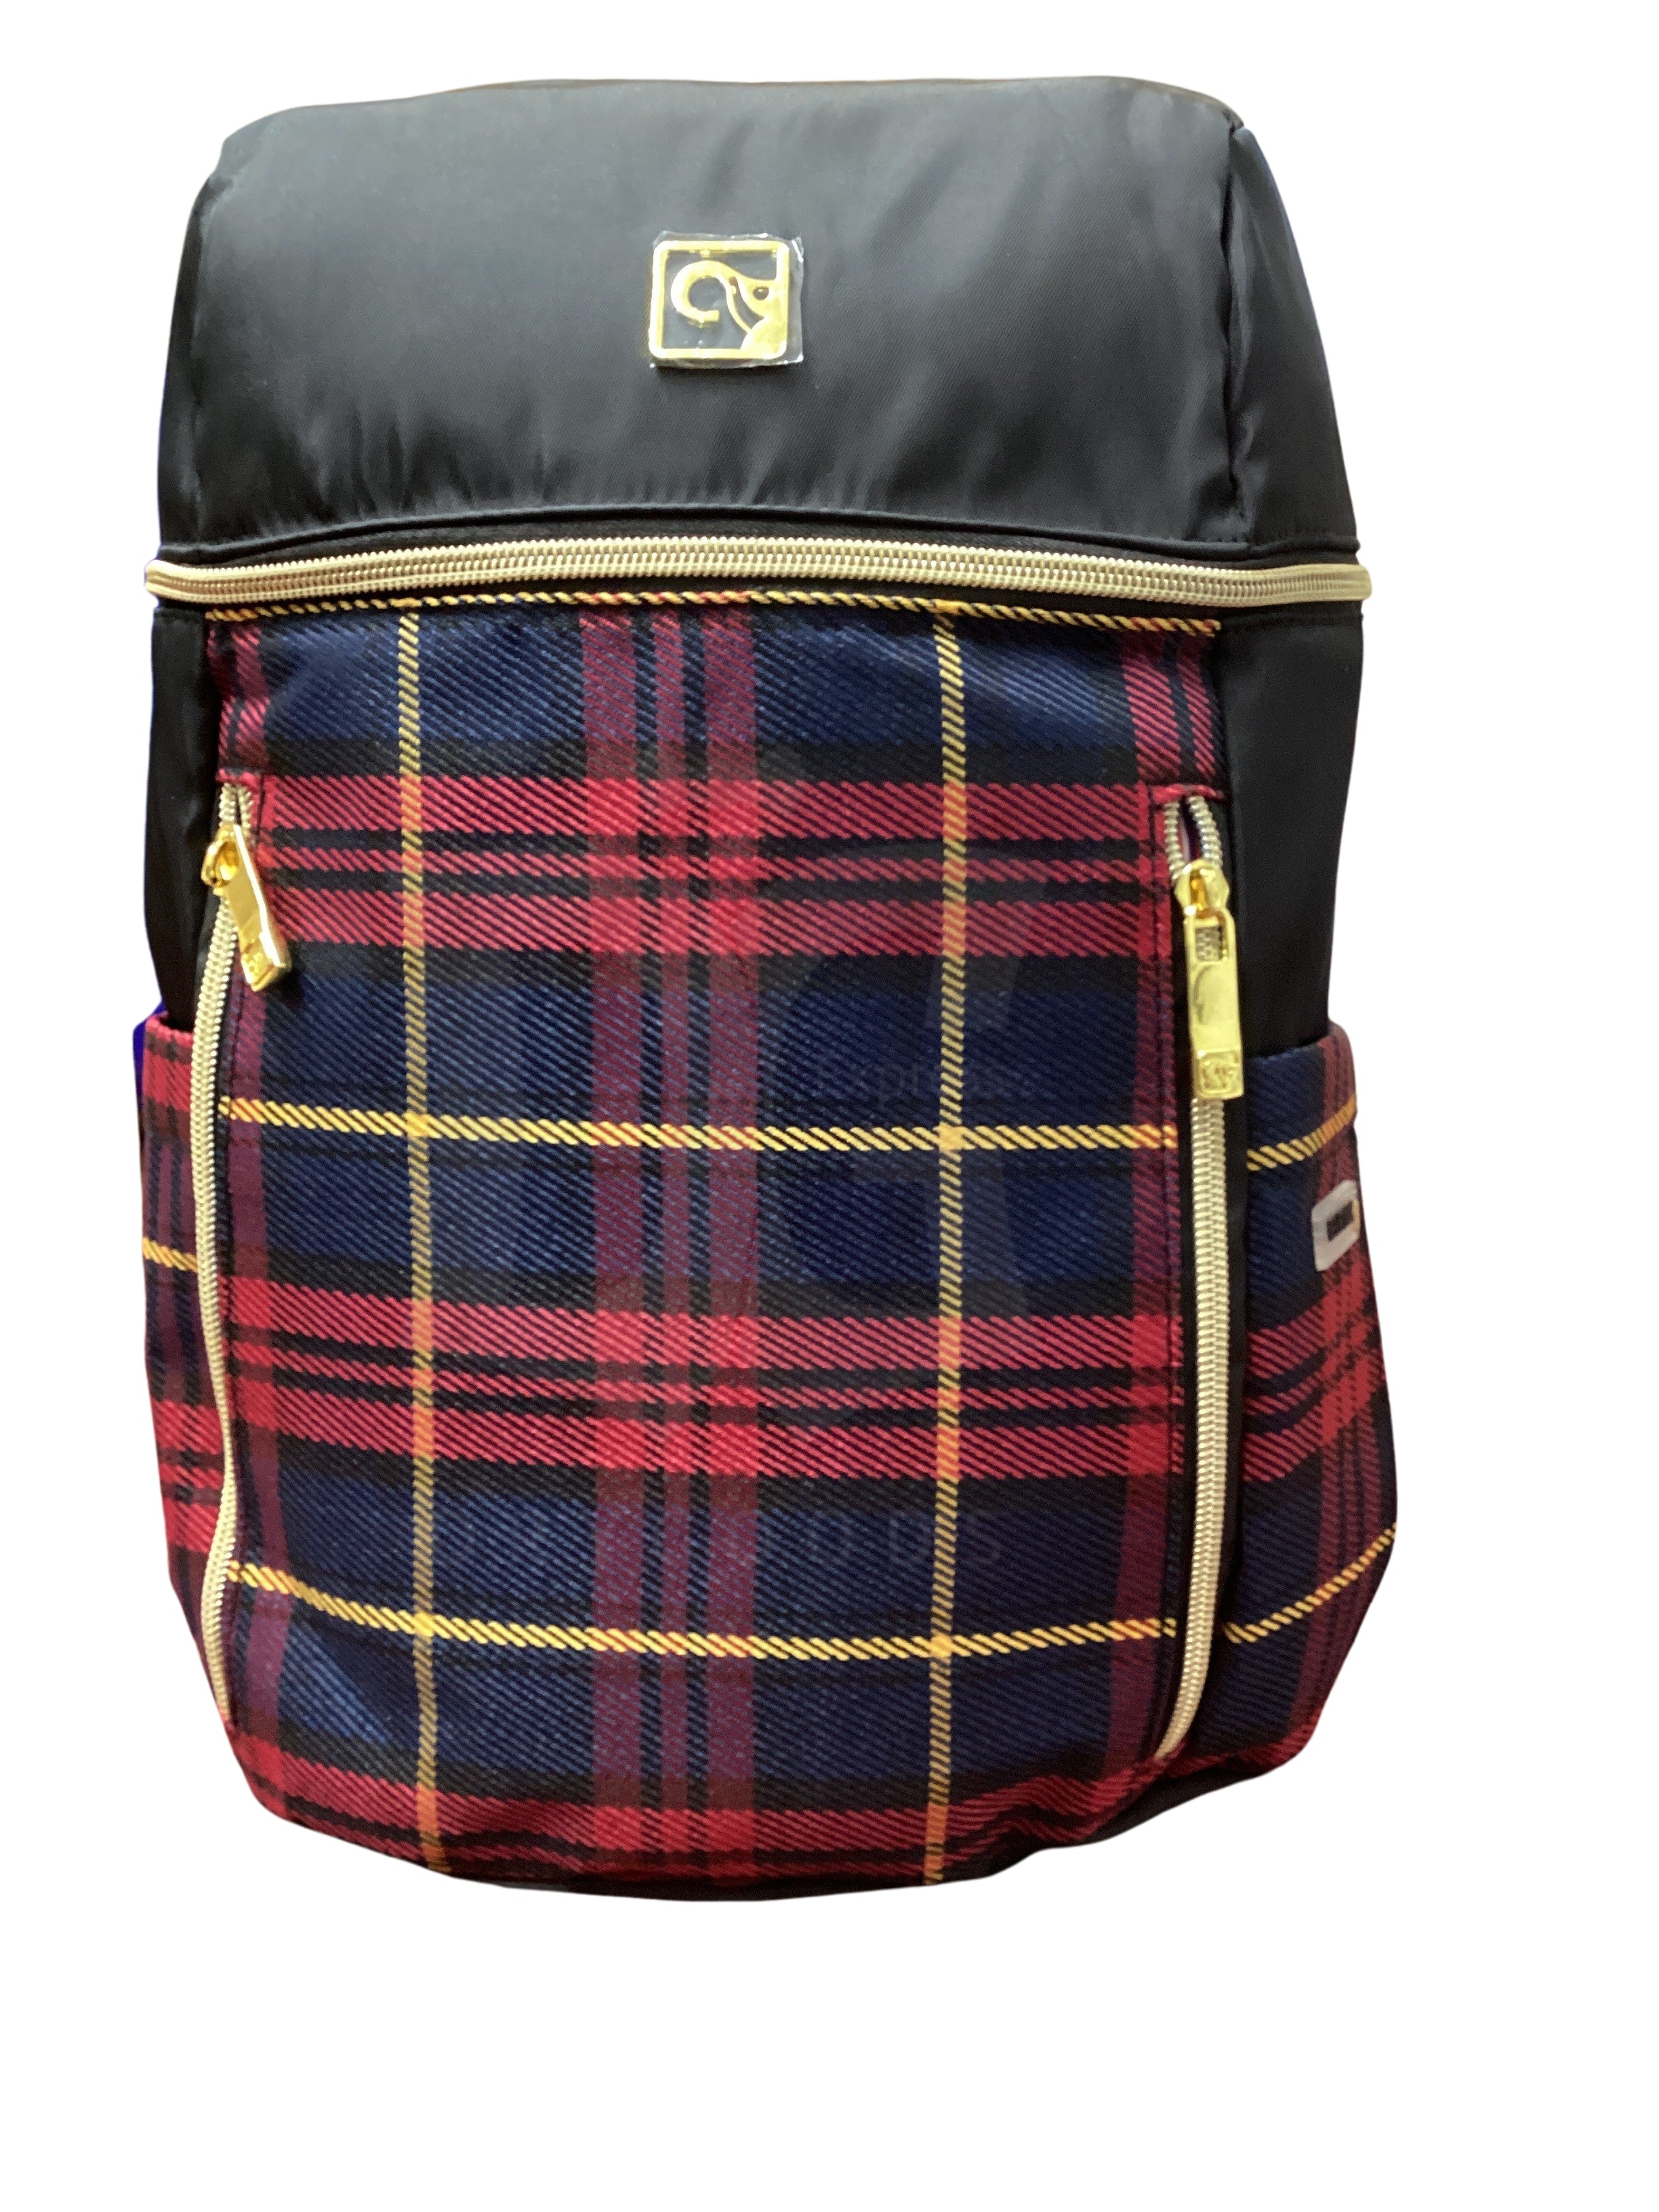 Elesac Briefcase Red Navy Yellow Plaid Backpack